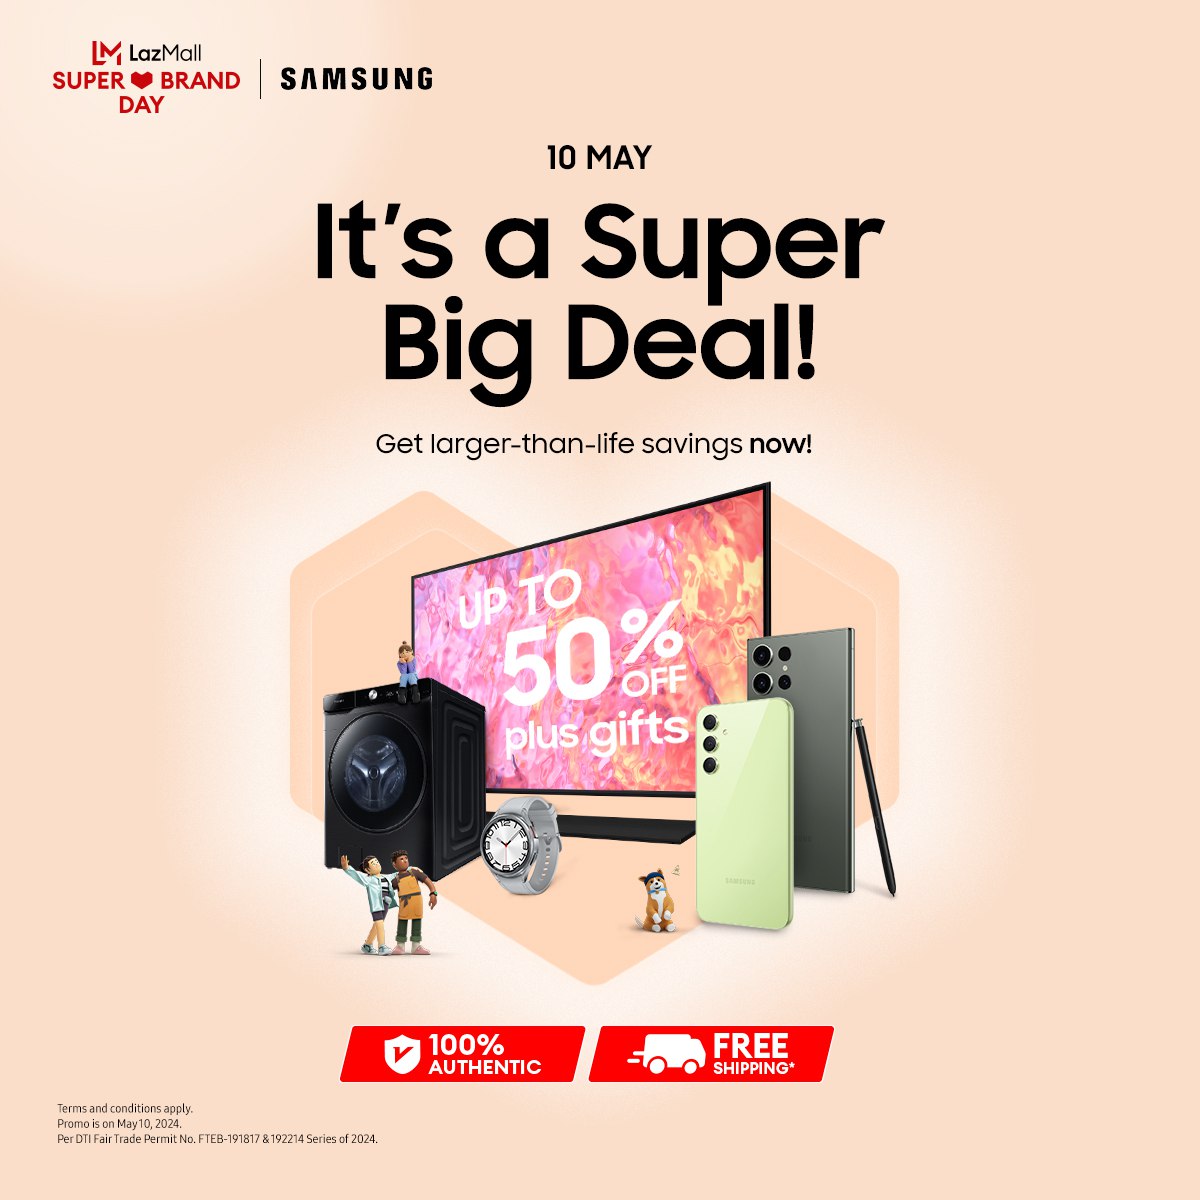 Samsung Supercharges Savings with Massive Deals on LazMall Super Brand Day! Poster